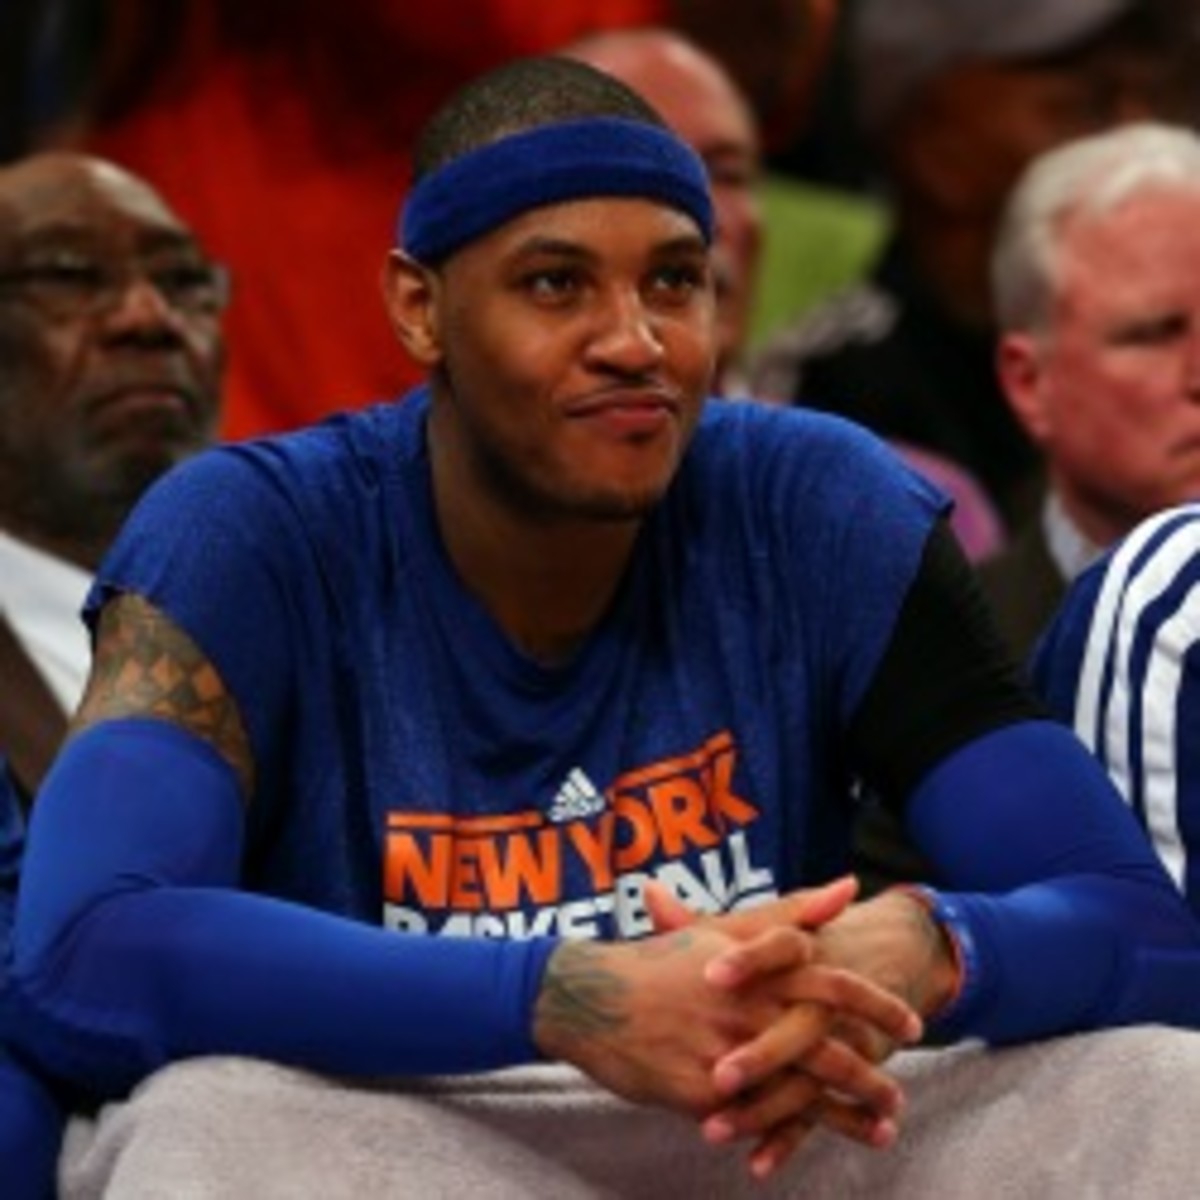 Carmelo Anthony received one first-place vote for MVP, spoiling LeBron James' shot at a unanimous selection. (Elsa/Getty Images)